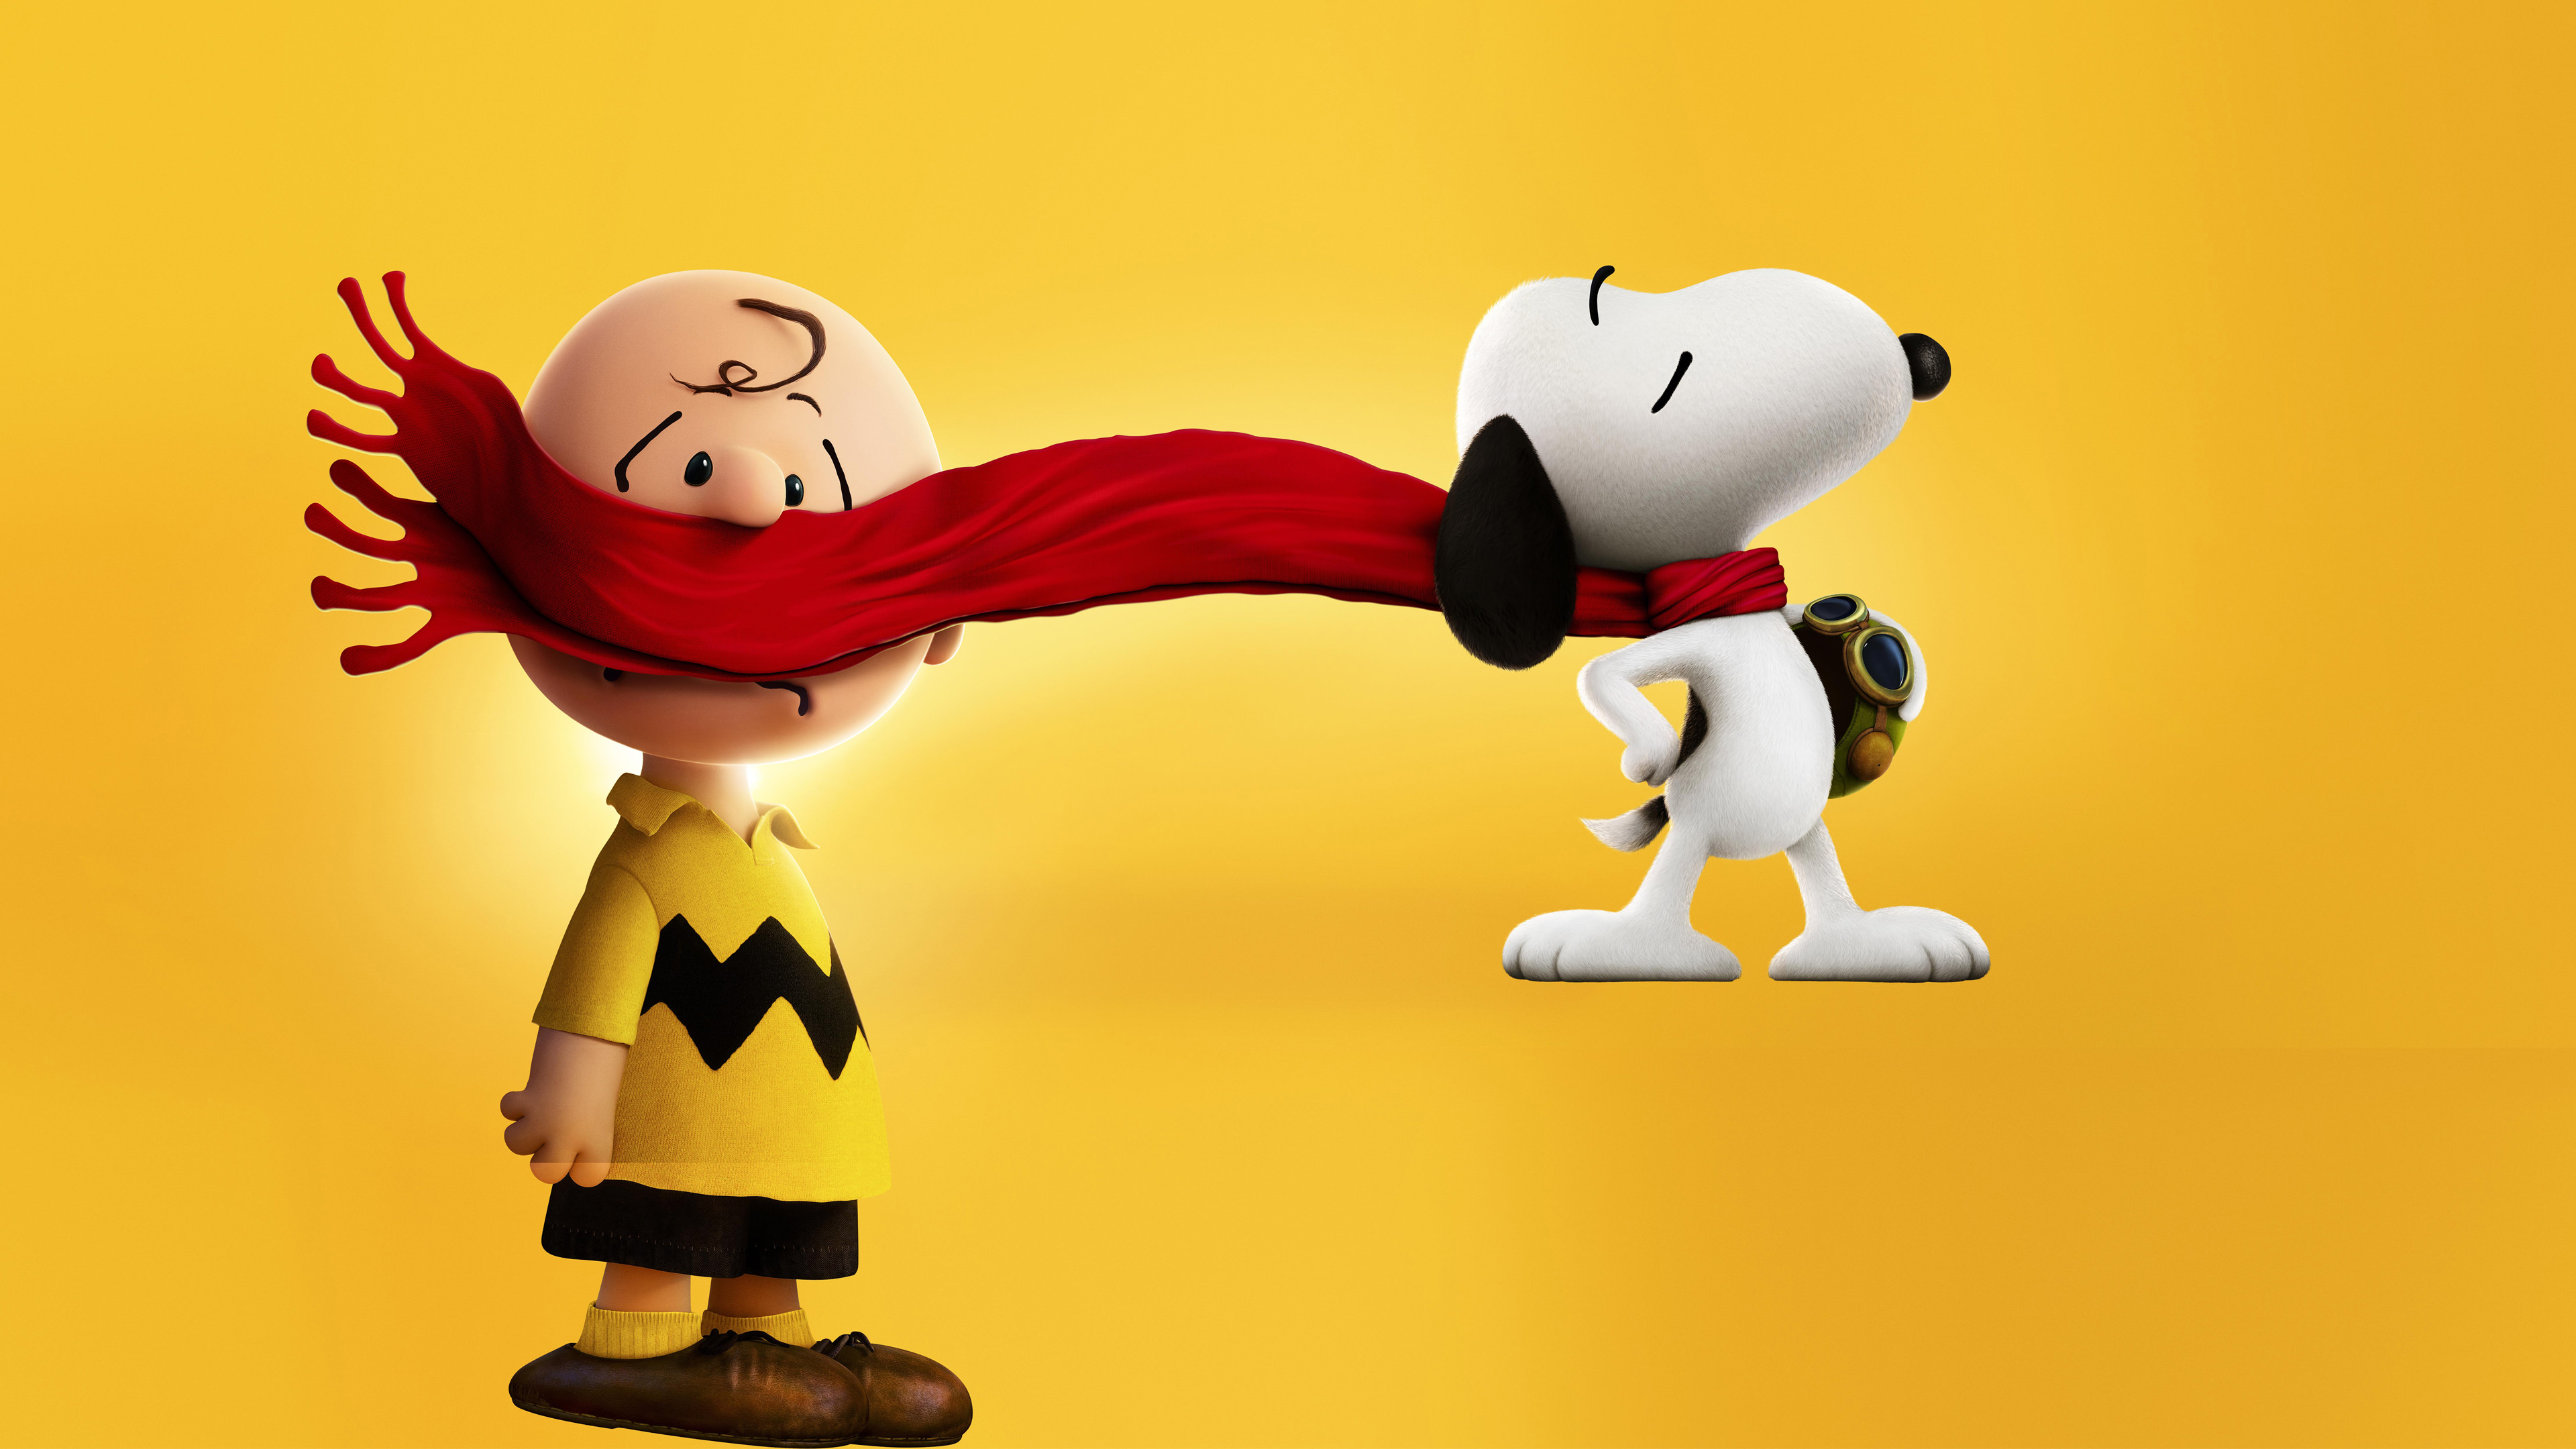 20+ Snoopy Wallpapers, Backgrounds, Images | FreeCreatives